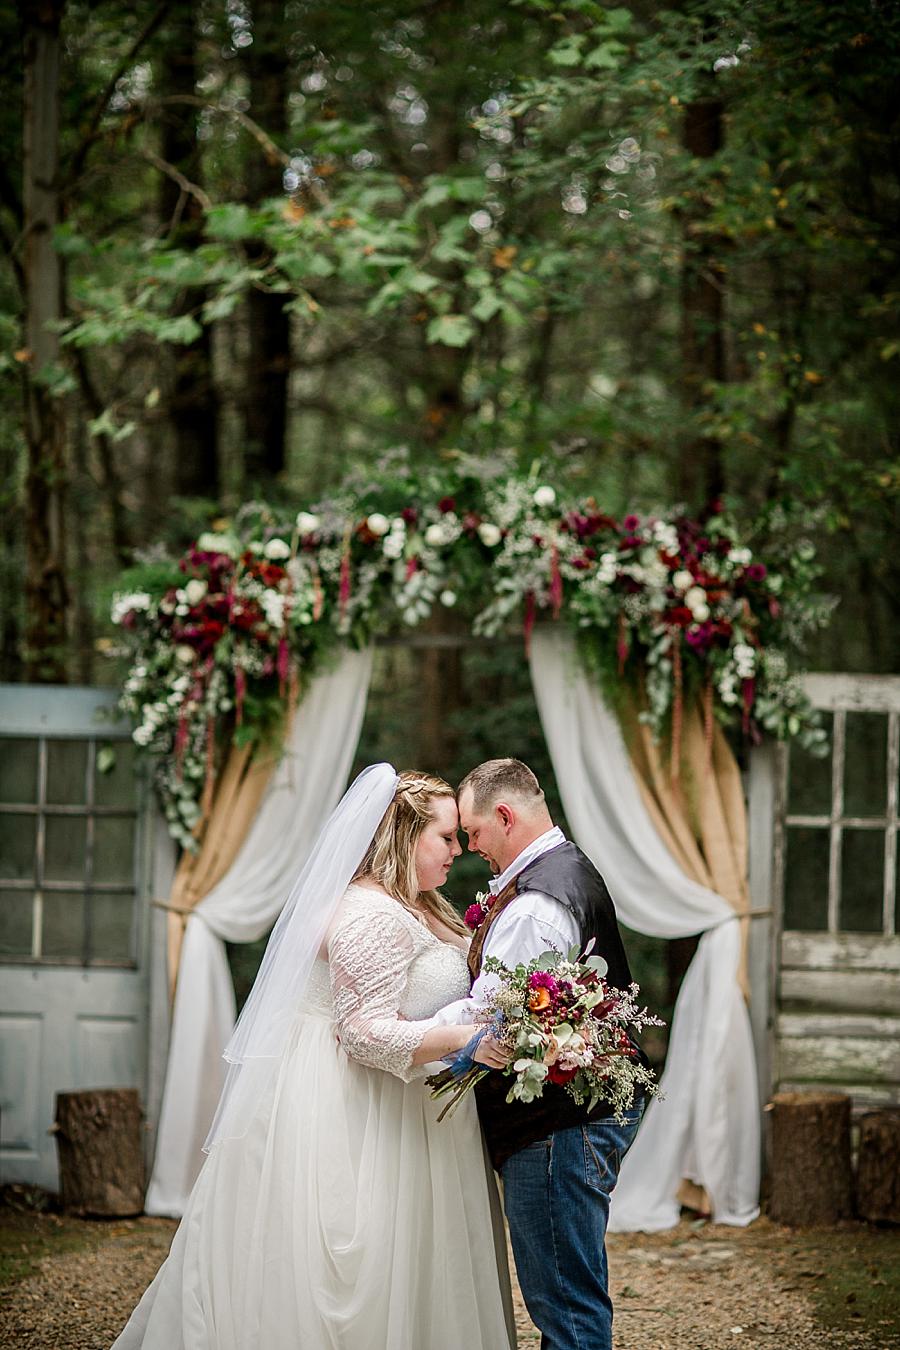 Flower arch at this Sampson's Hollow Fall Wedding by Knoxville Wedding Photographer, Amanda May Photos.